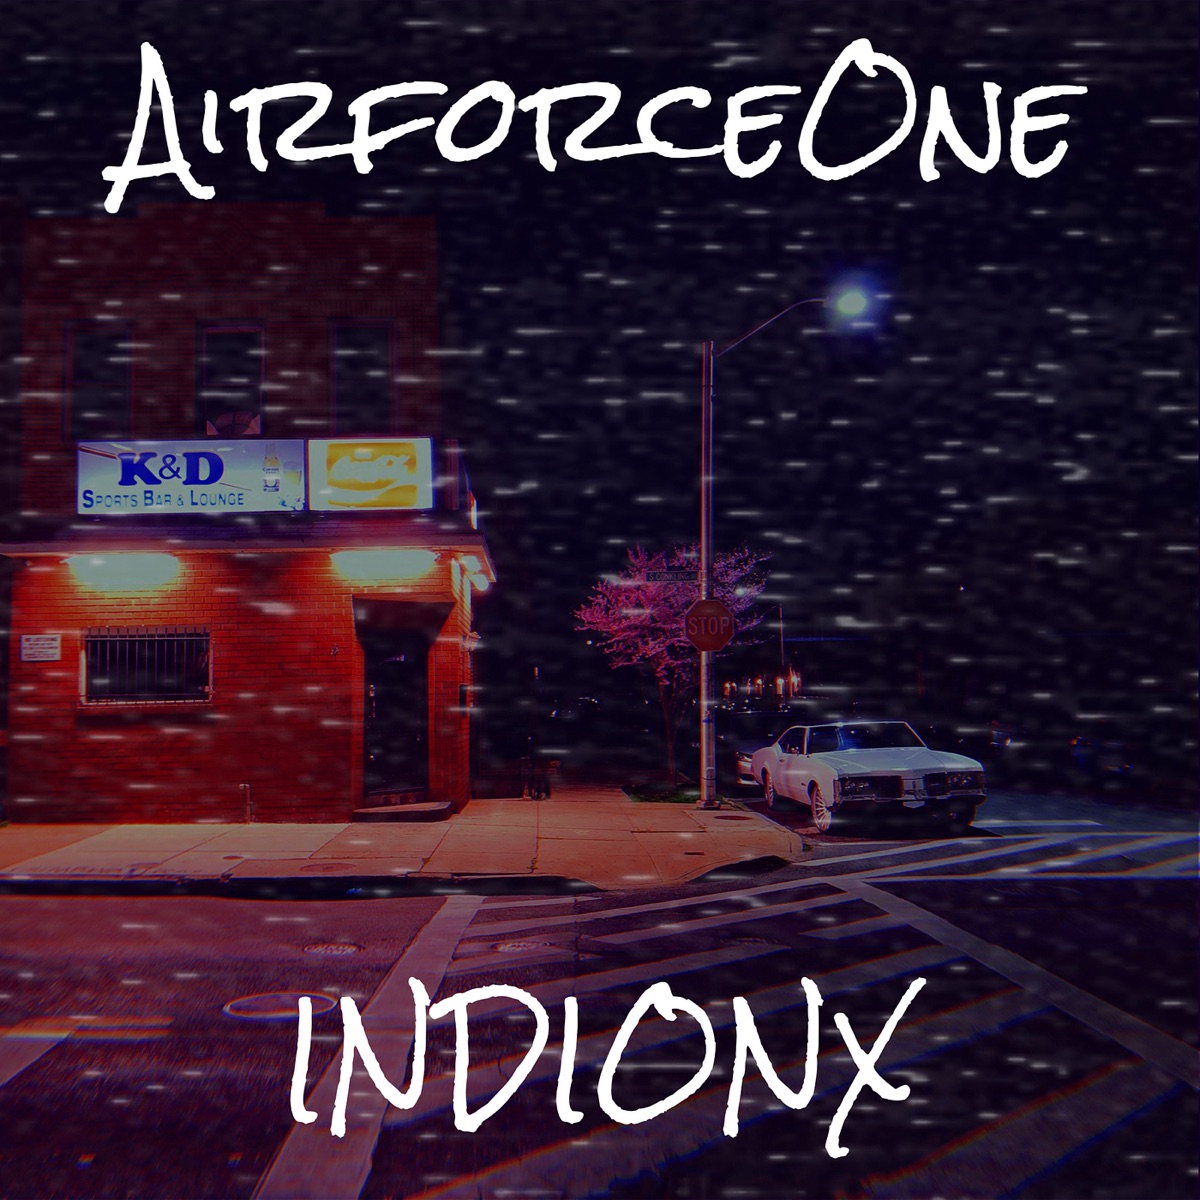 AirforceOne - Single - Album by INDIONX - Apple Music